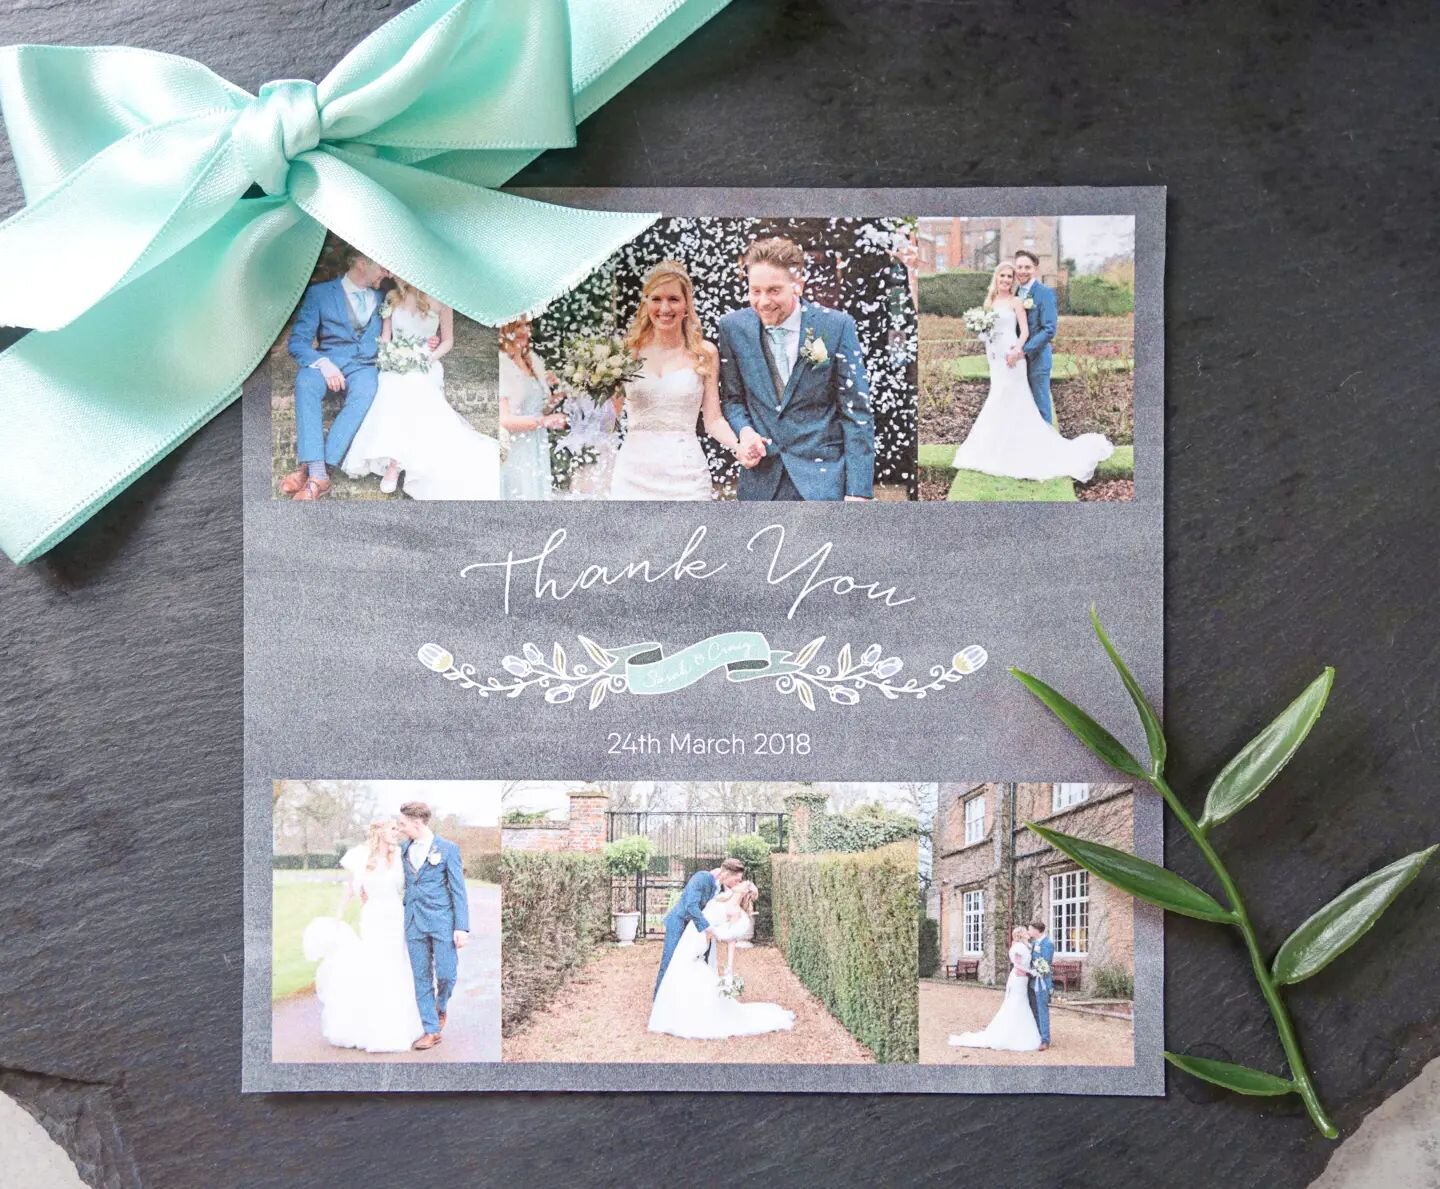 🤍🌿
After the wedding don't forget those thank you cards!
.
Why not add a few photos from your special day to show your guests how amazing you looked! 😄
.
The reverse is blank so you can write your own words.
.
Each of my collections has its own co